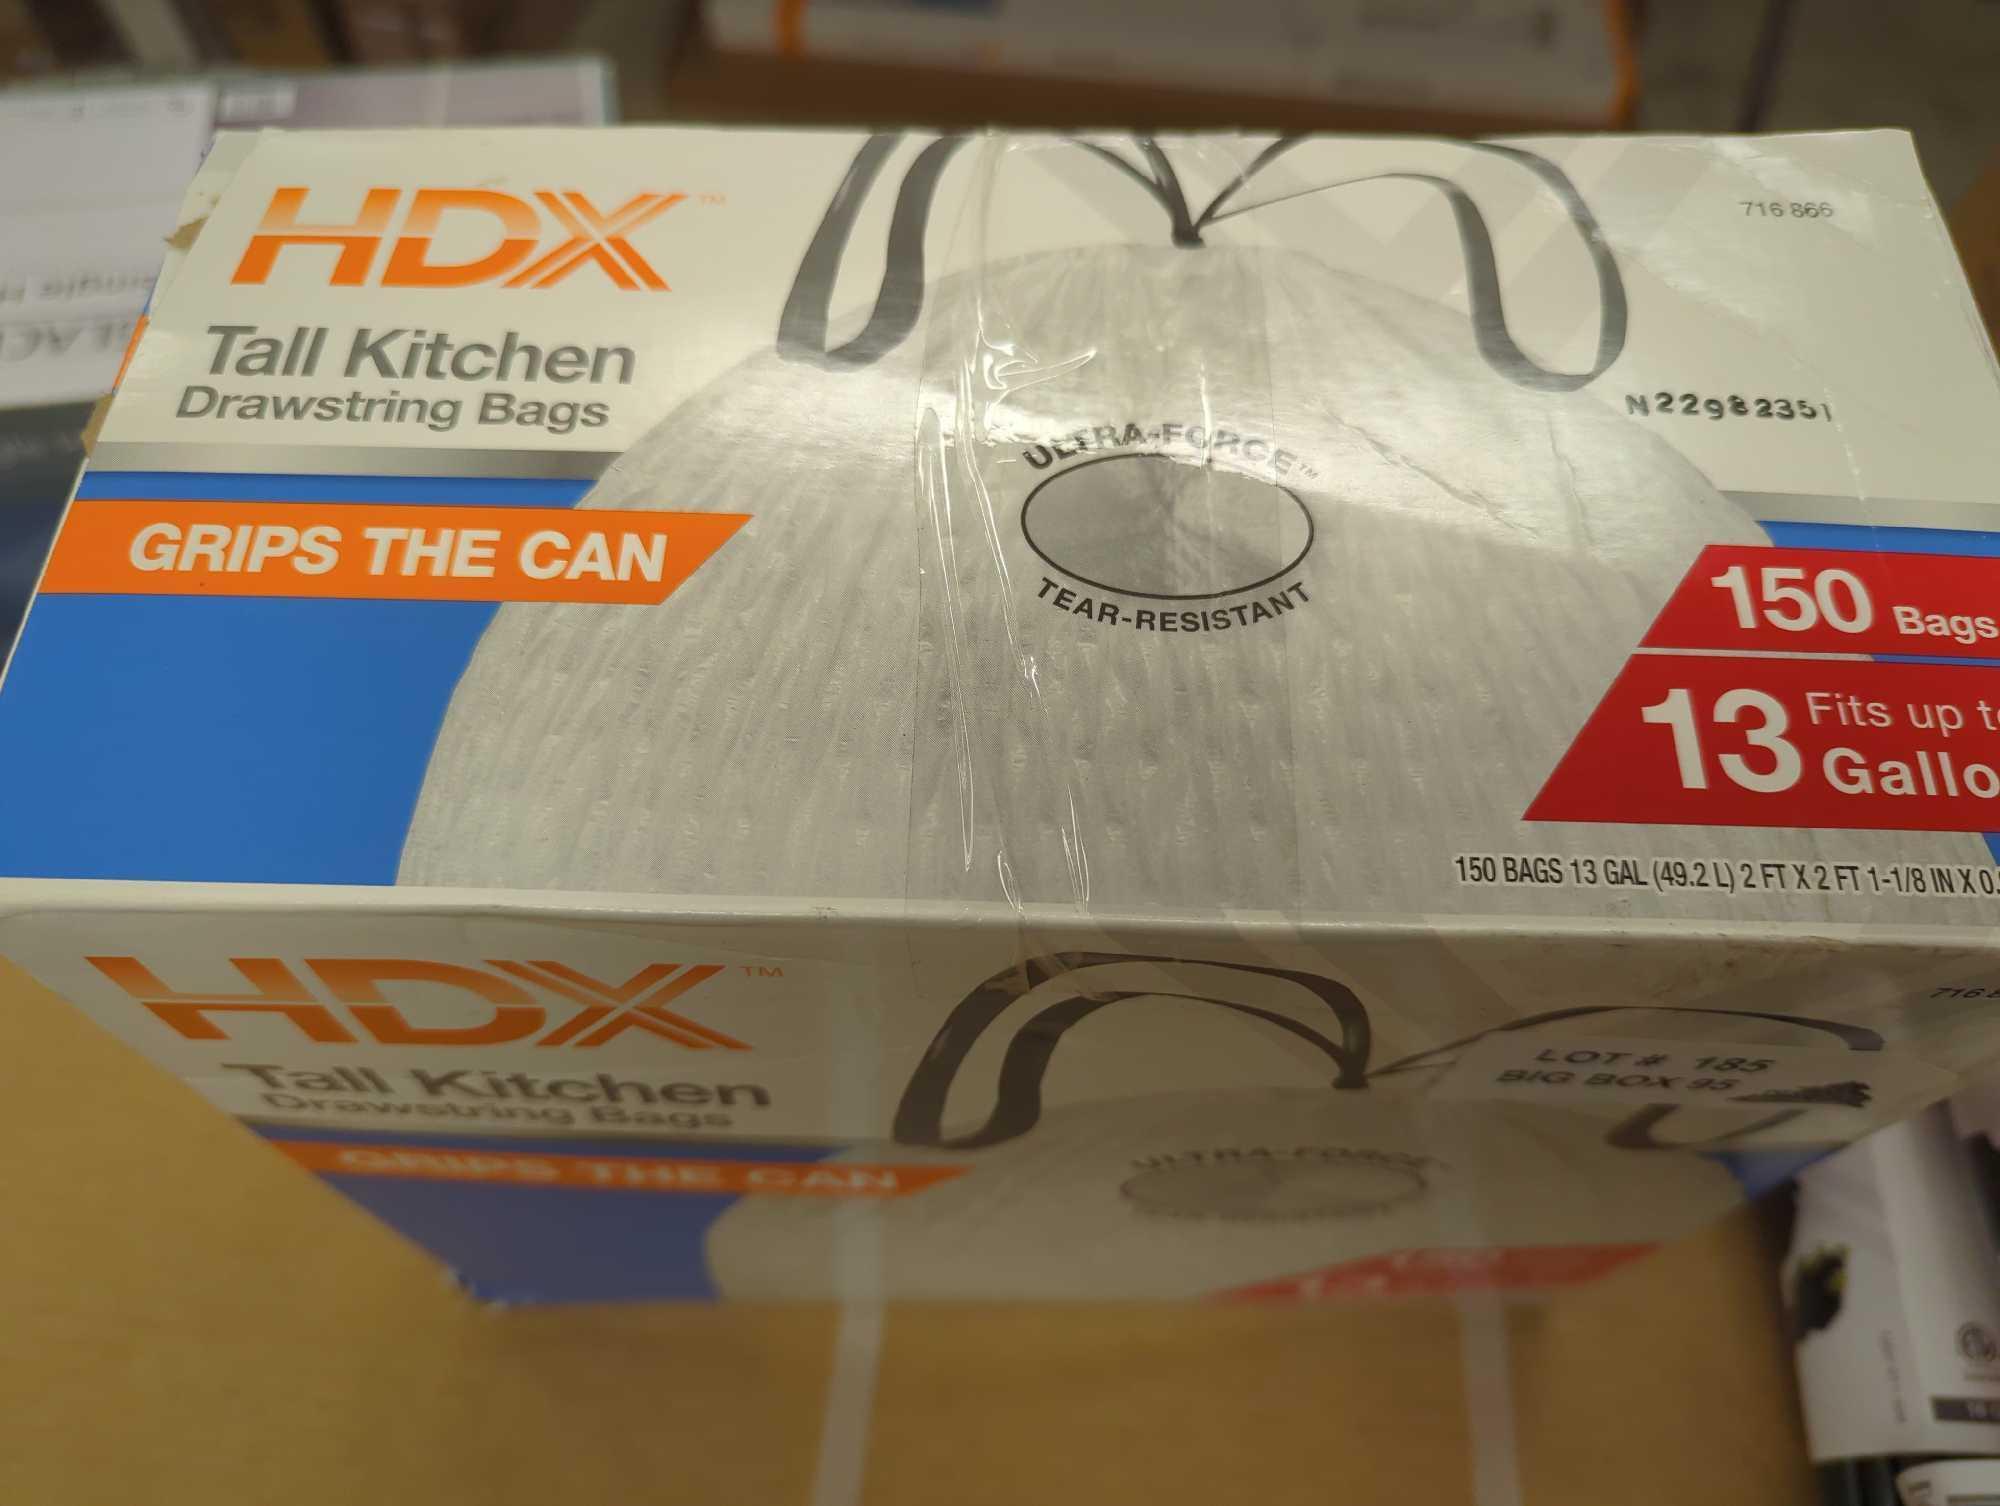 HDX FlexPro 13 Gallon Reinforced Top Drawstring Kitchen Trash Bags, Appears to be Used and is